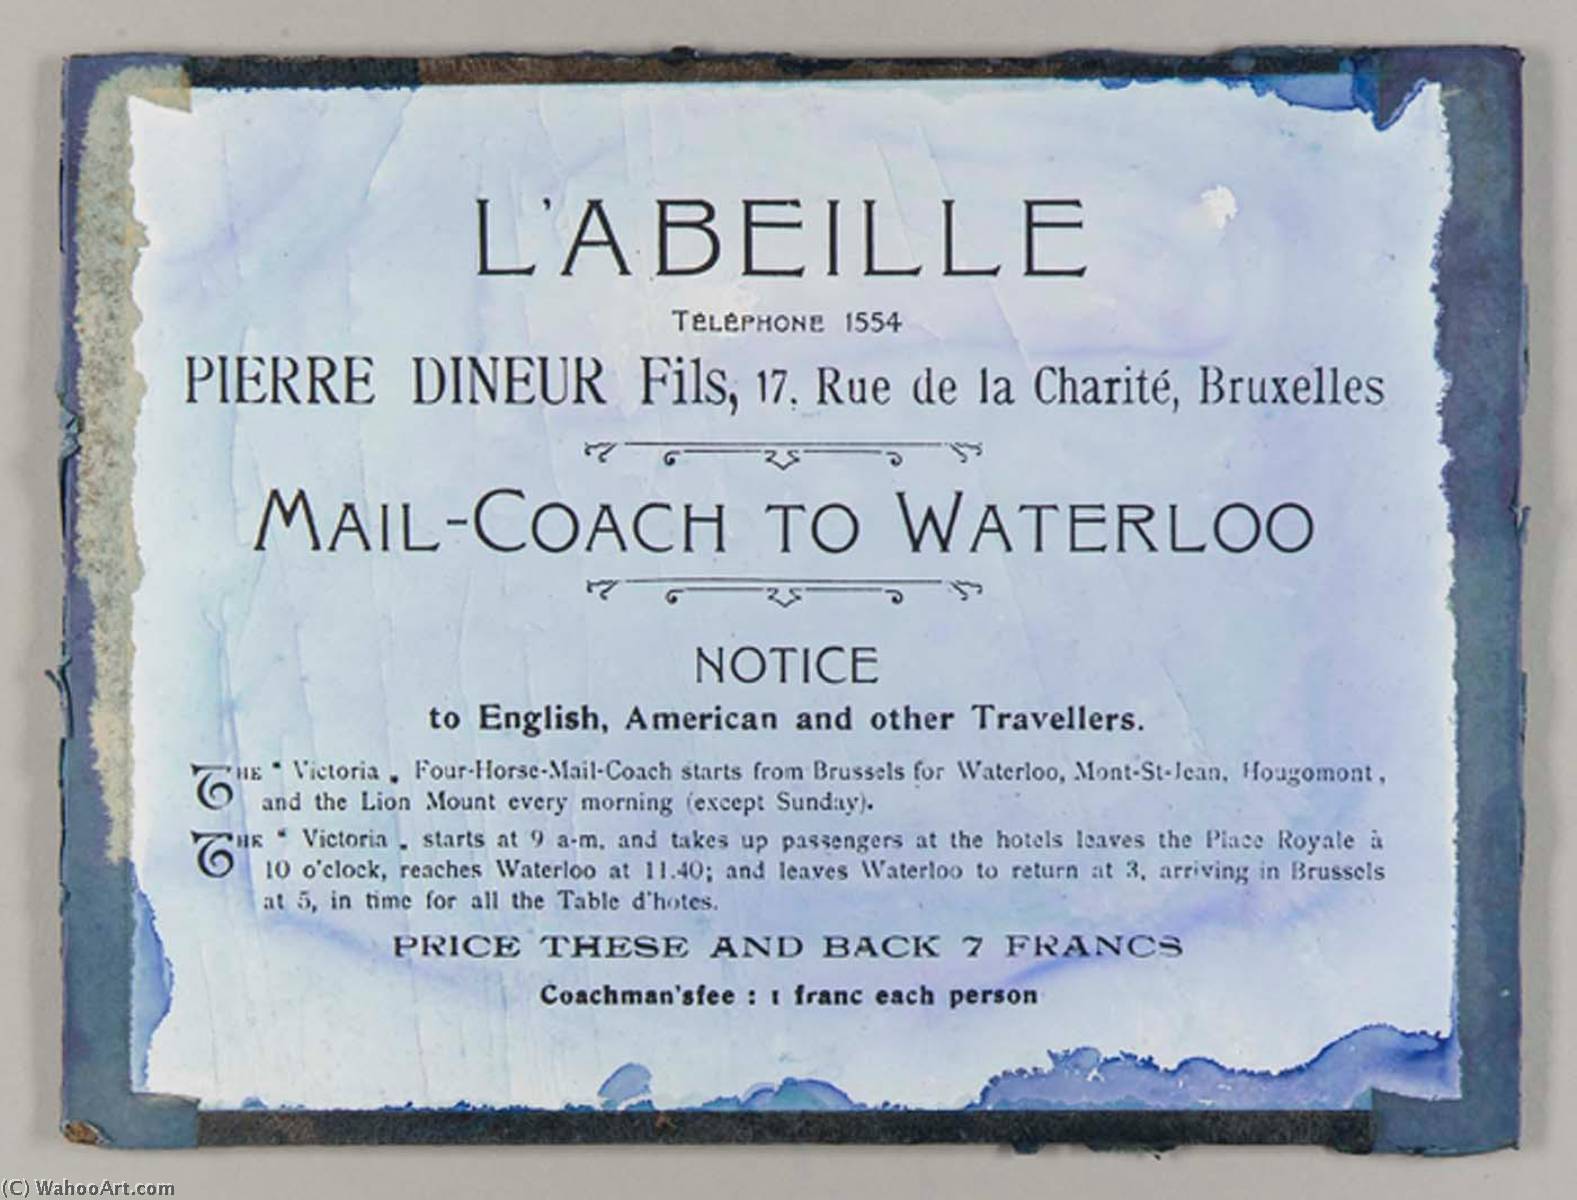 Wikioo.org - สารานุกรมวิจิตรศิลป์ - จิตรกรรม Joseph Cornell - Untitled (ad for the L'Abeille mail coach to Waterloo)